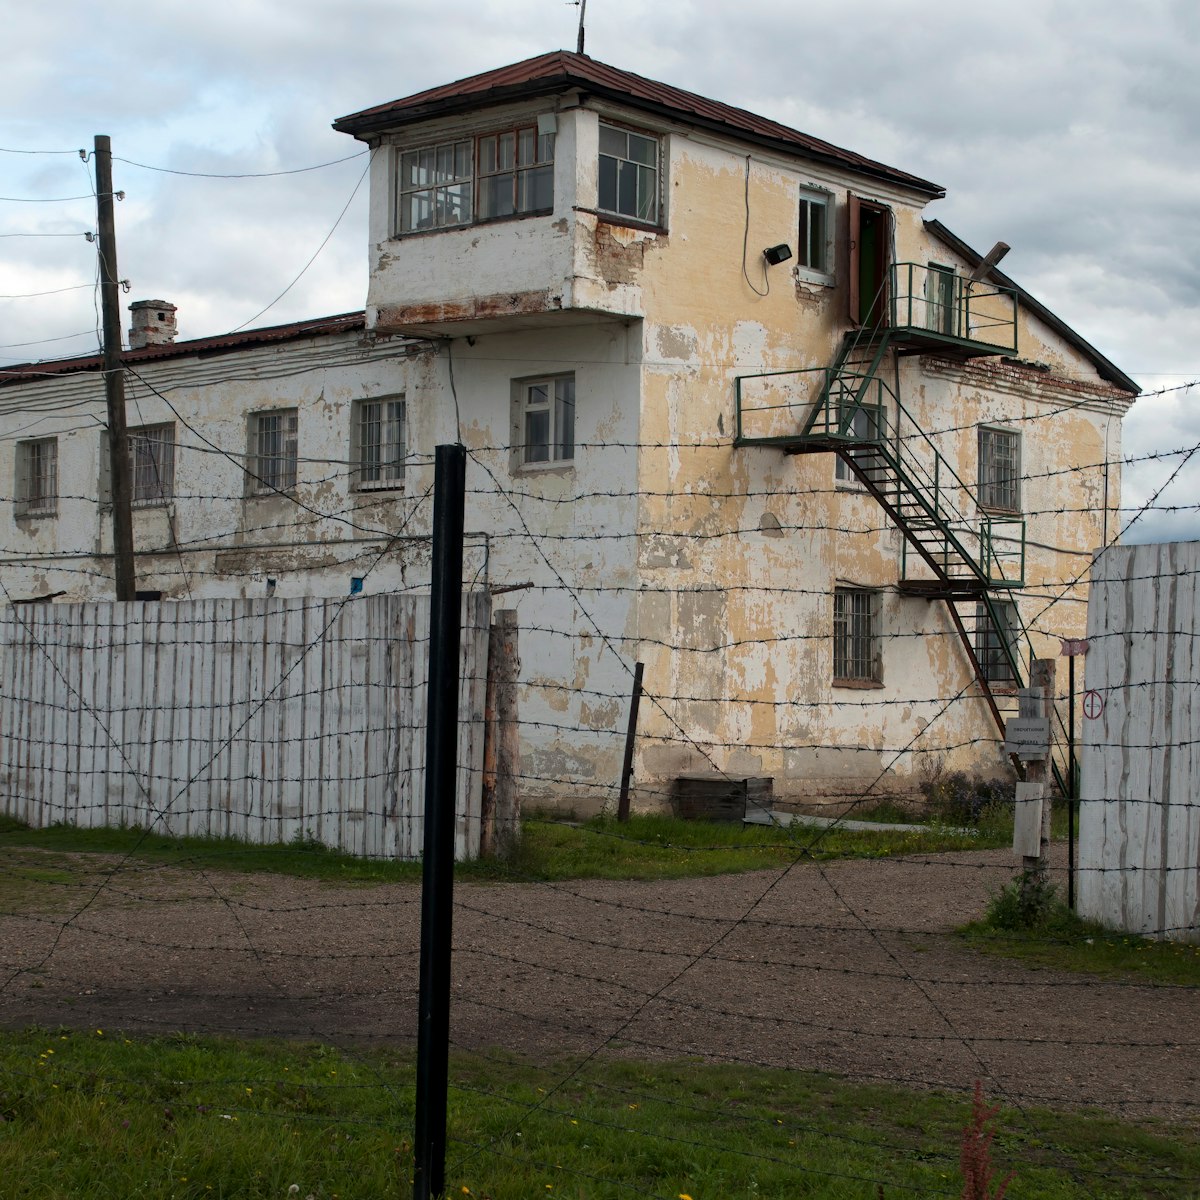 Perm Russia Aug 28 2012, building at the The Museum of the History of Political Repression Perm-36; Shutterstock ID 1430166293; purchase_order: 65050; job: ; client: ; other:
1430166293